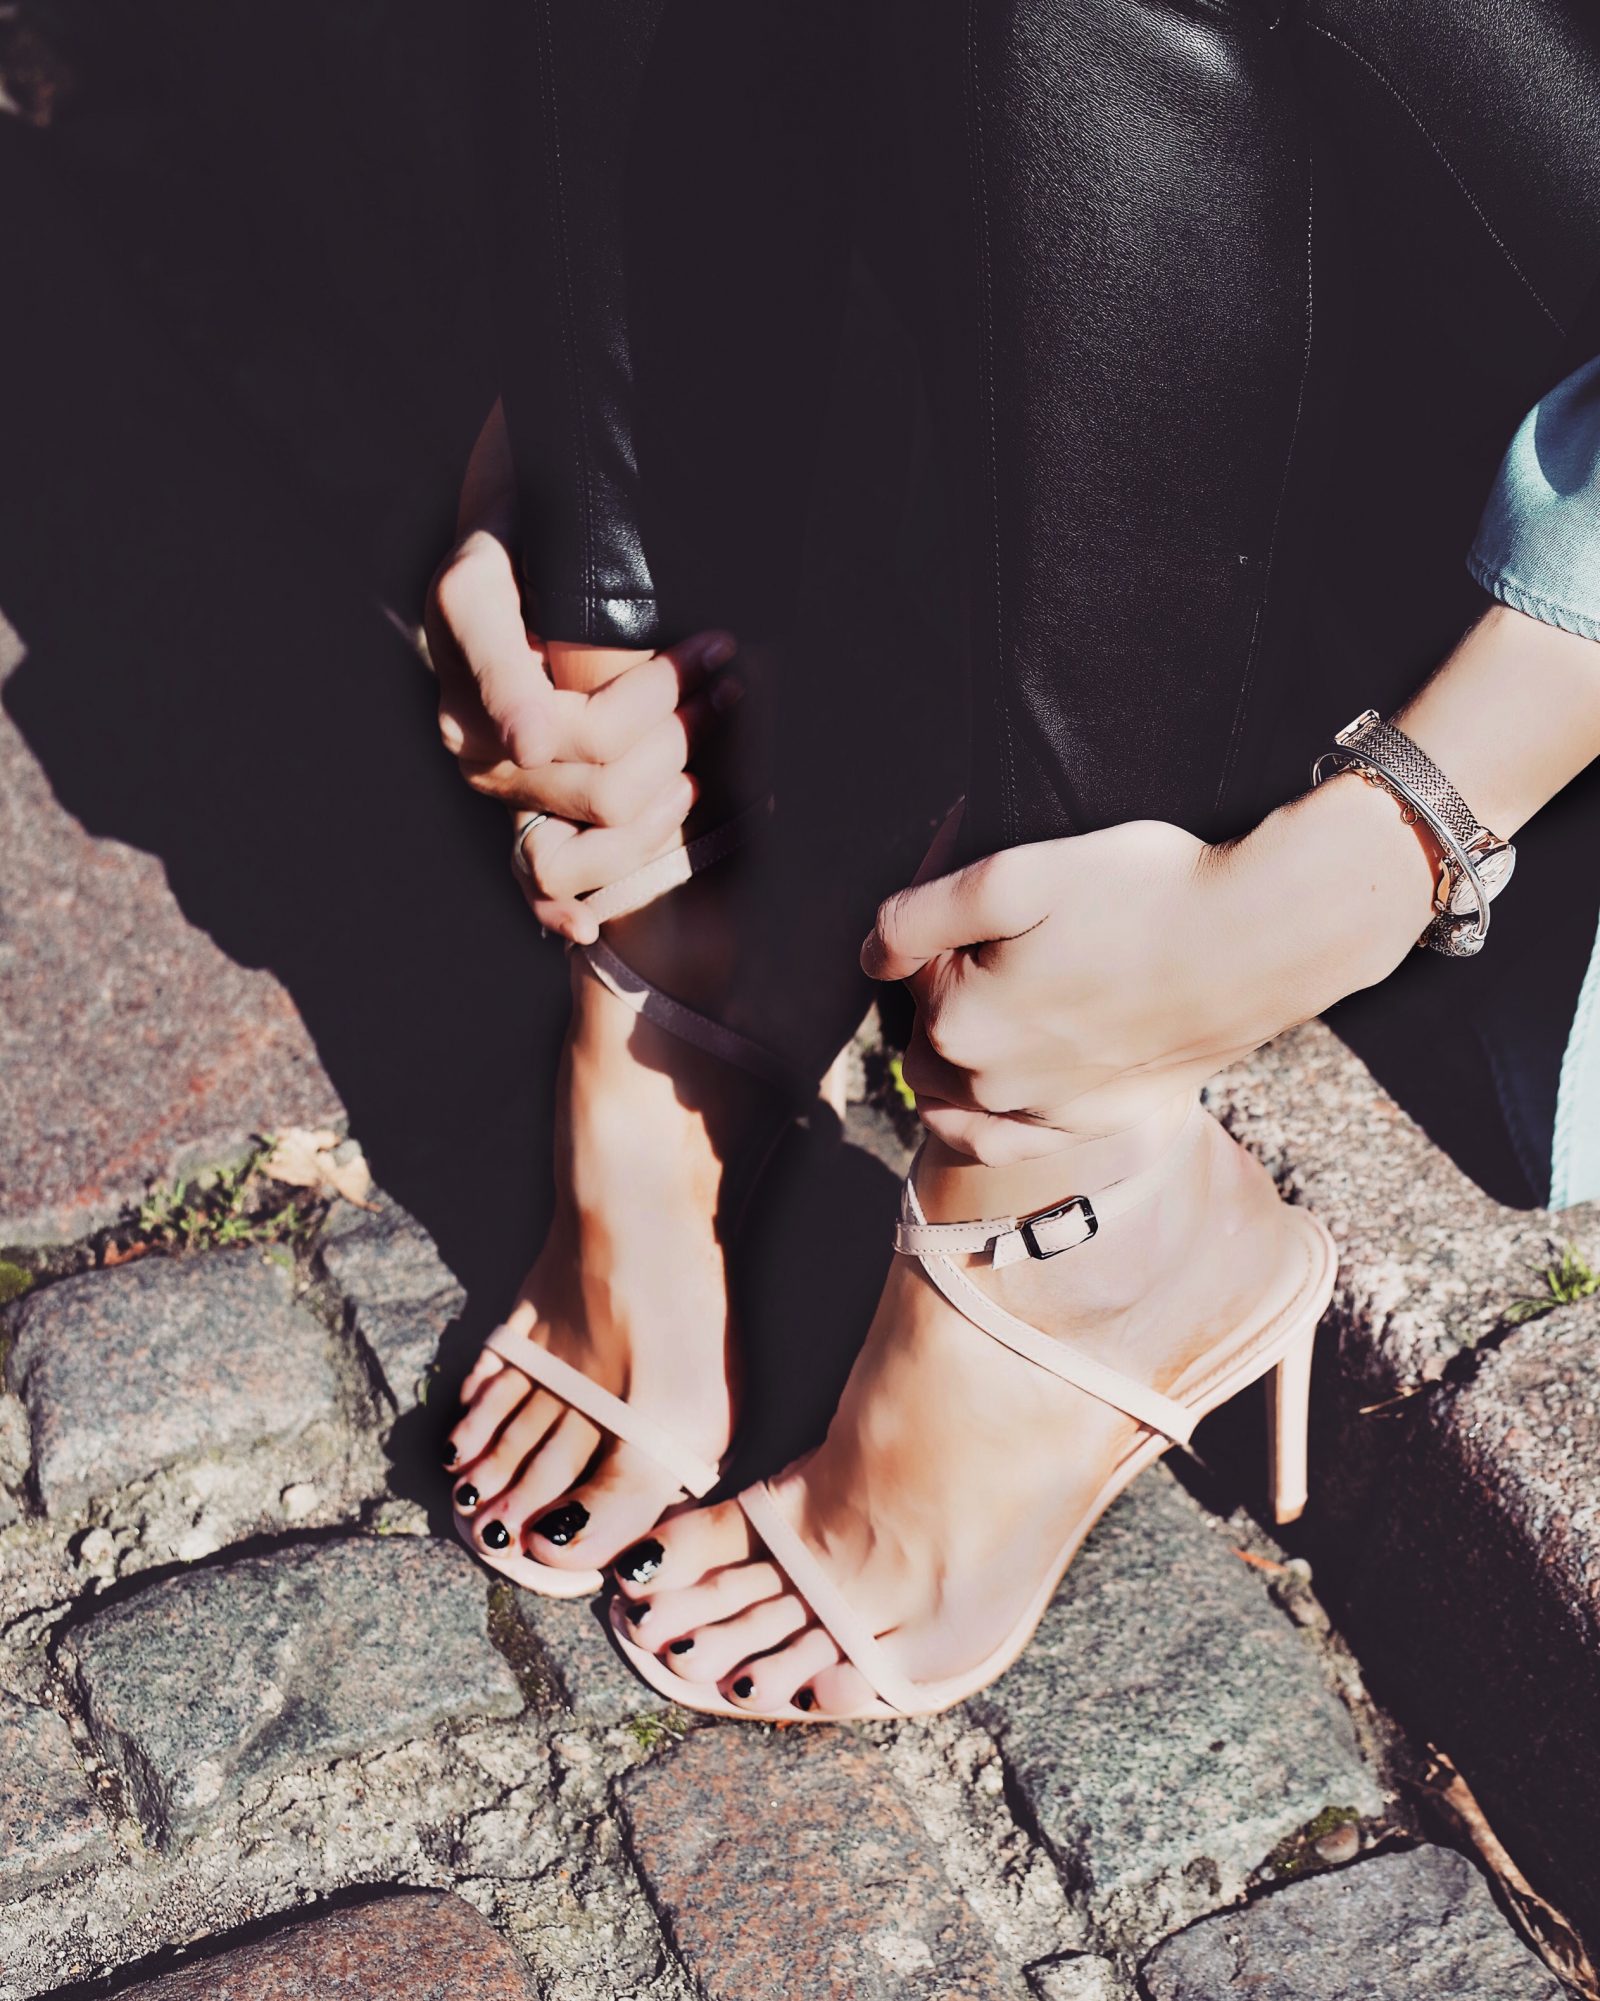 LFW Streetstyle - Nude Sandals - Fashion Blogger Sinead Crowe